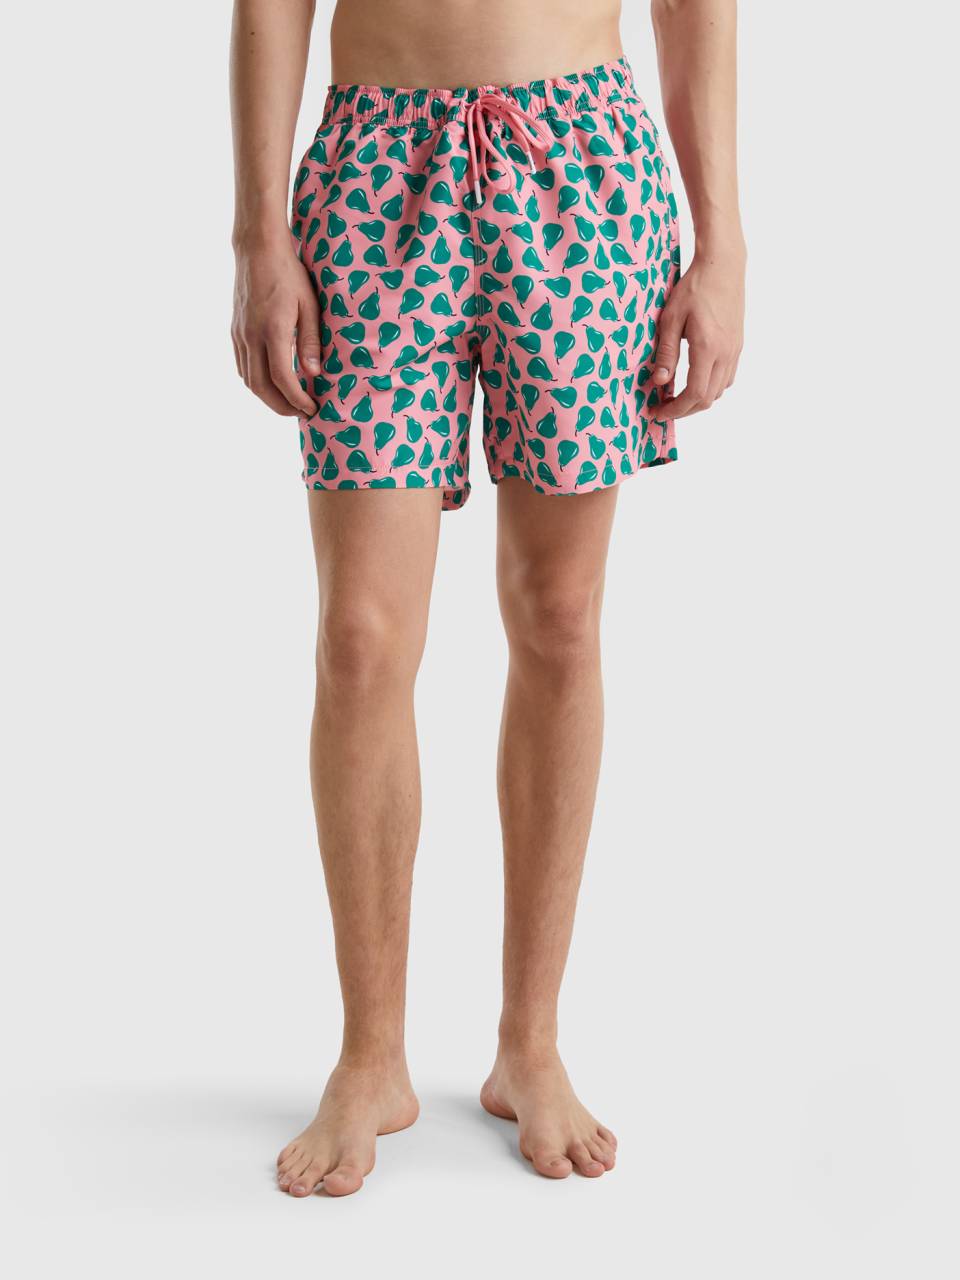 Benetton pink swim trunks with pear pattern. 1